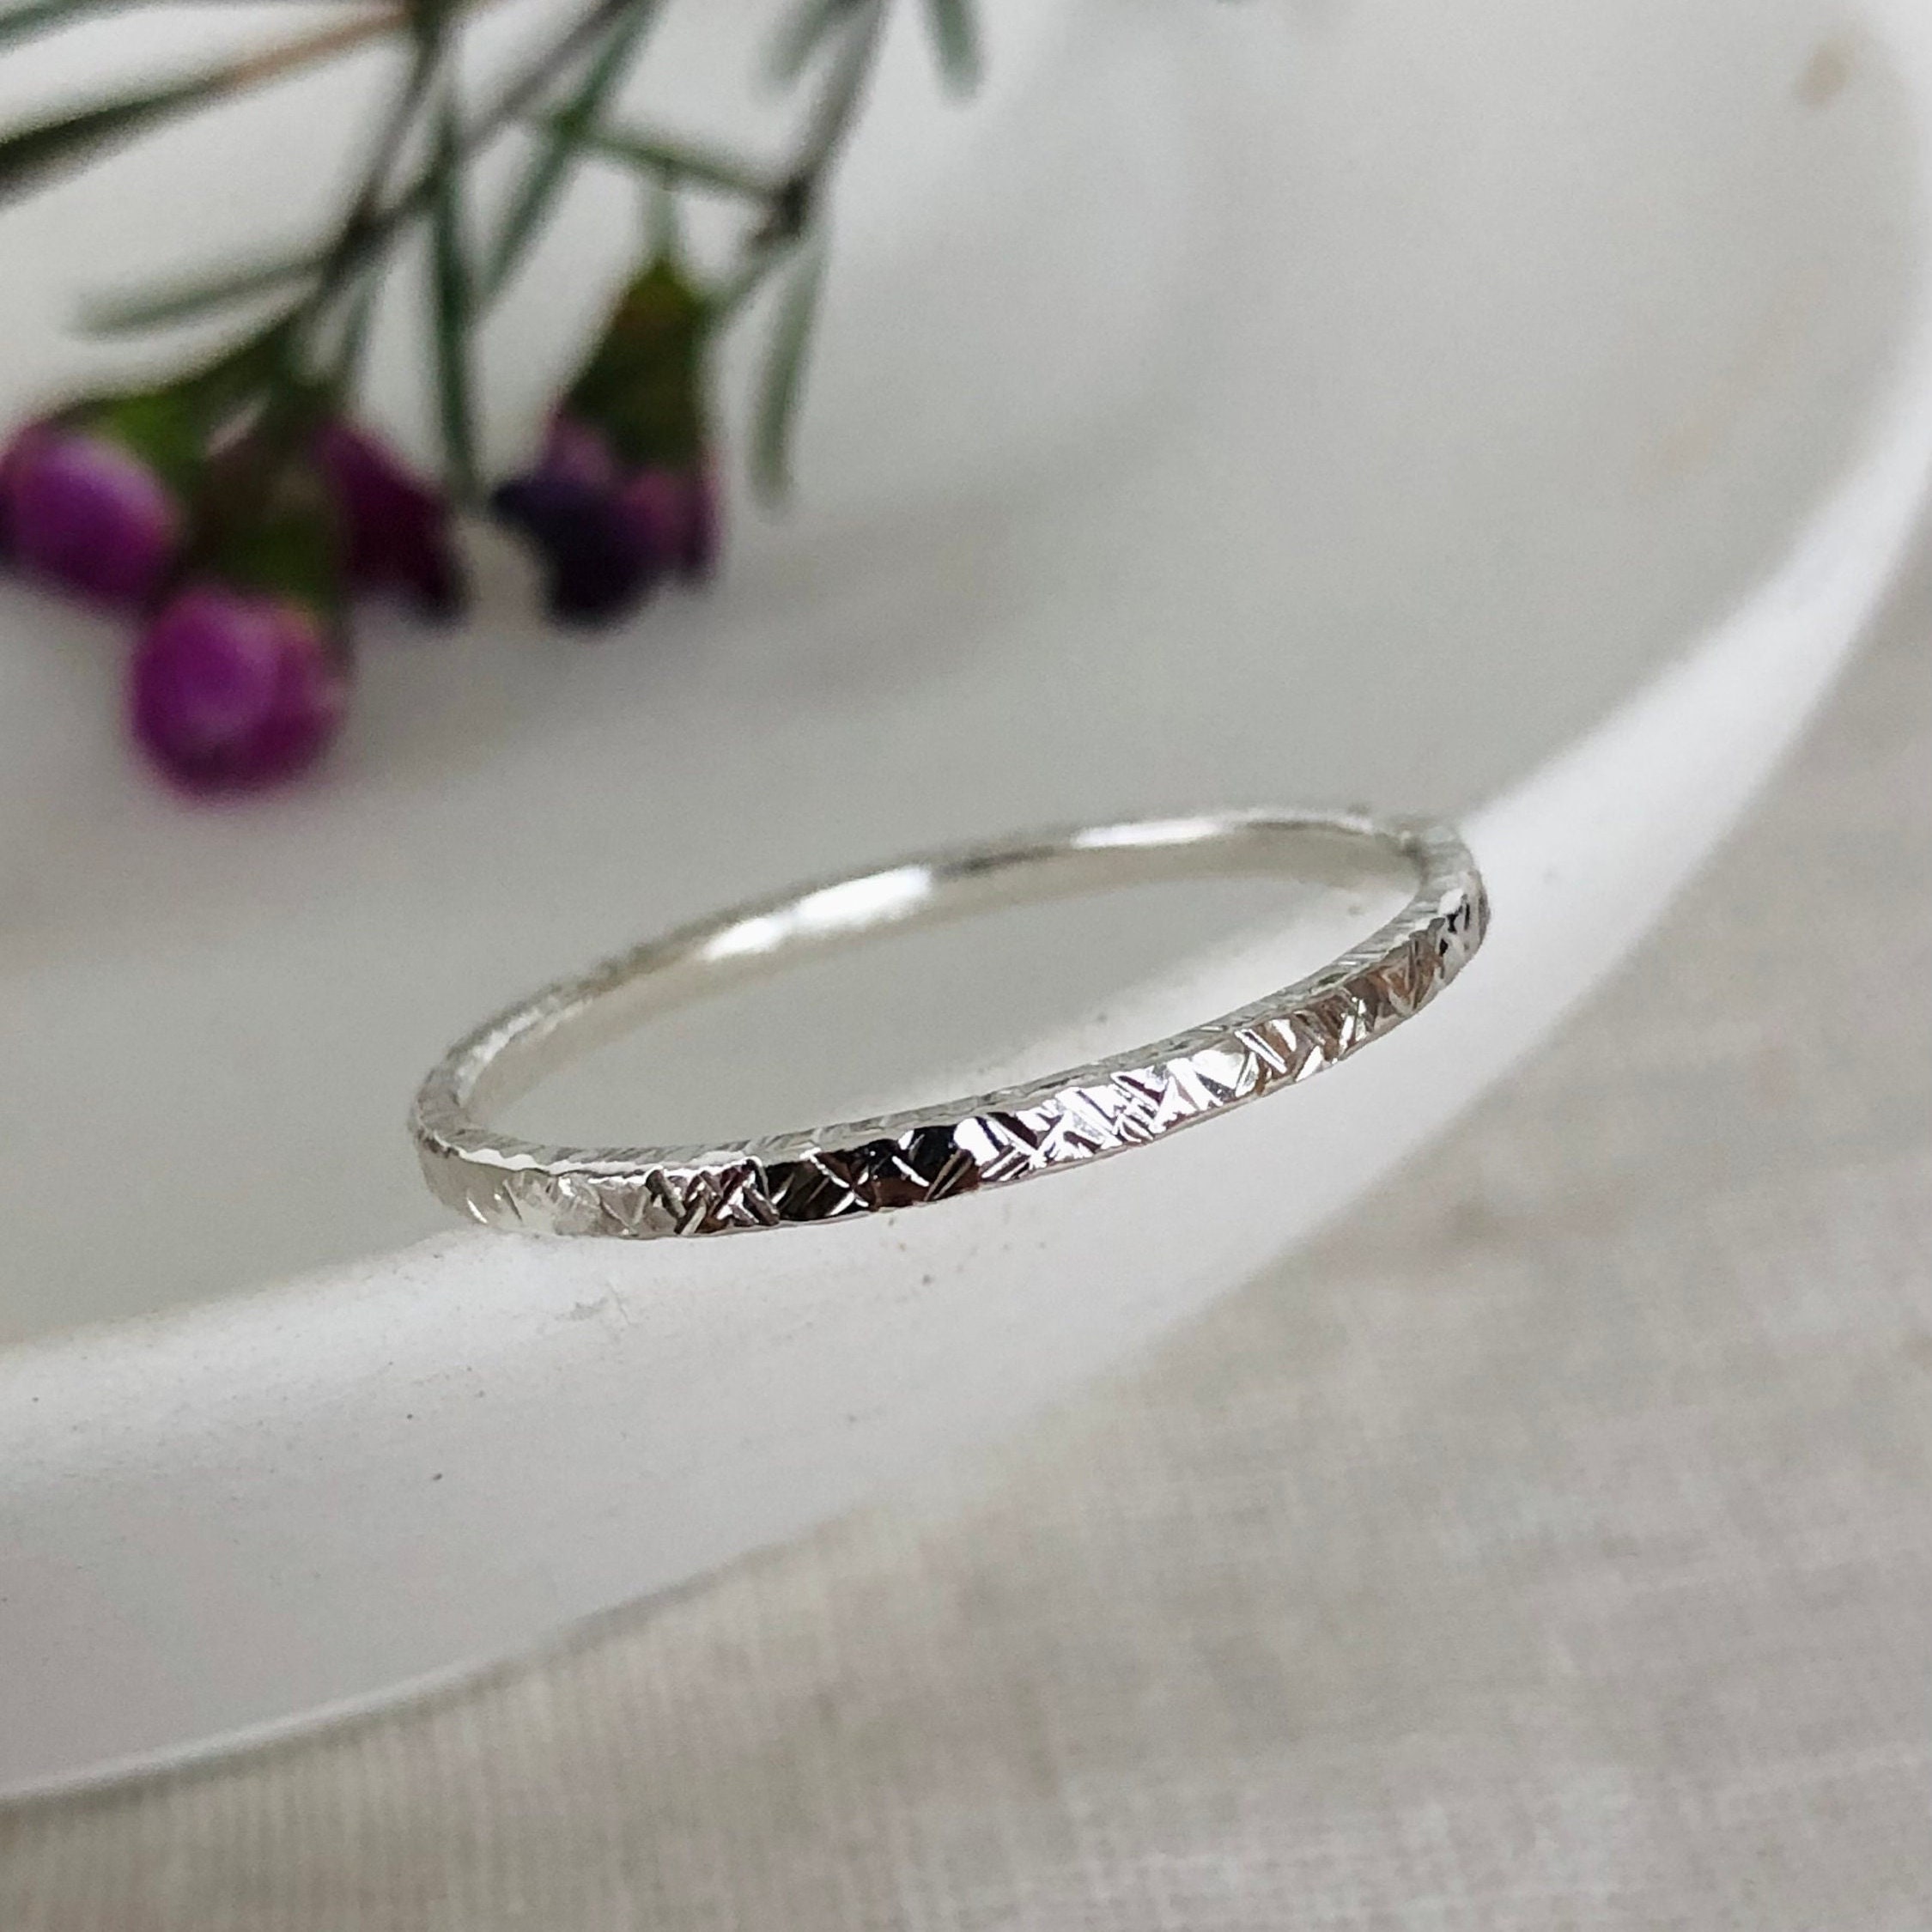 Recycled Silver Textured Slim Ring, Stacking Ring, Delicate Wedding Band - Handmade Sustainable Jewellery